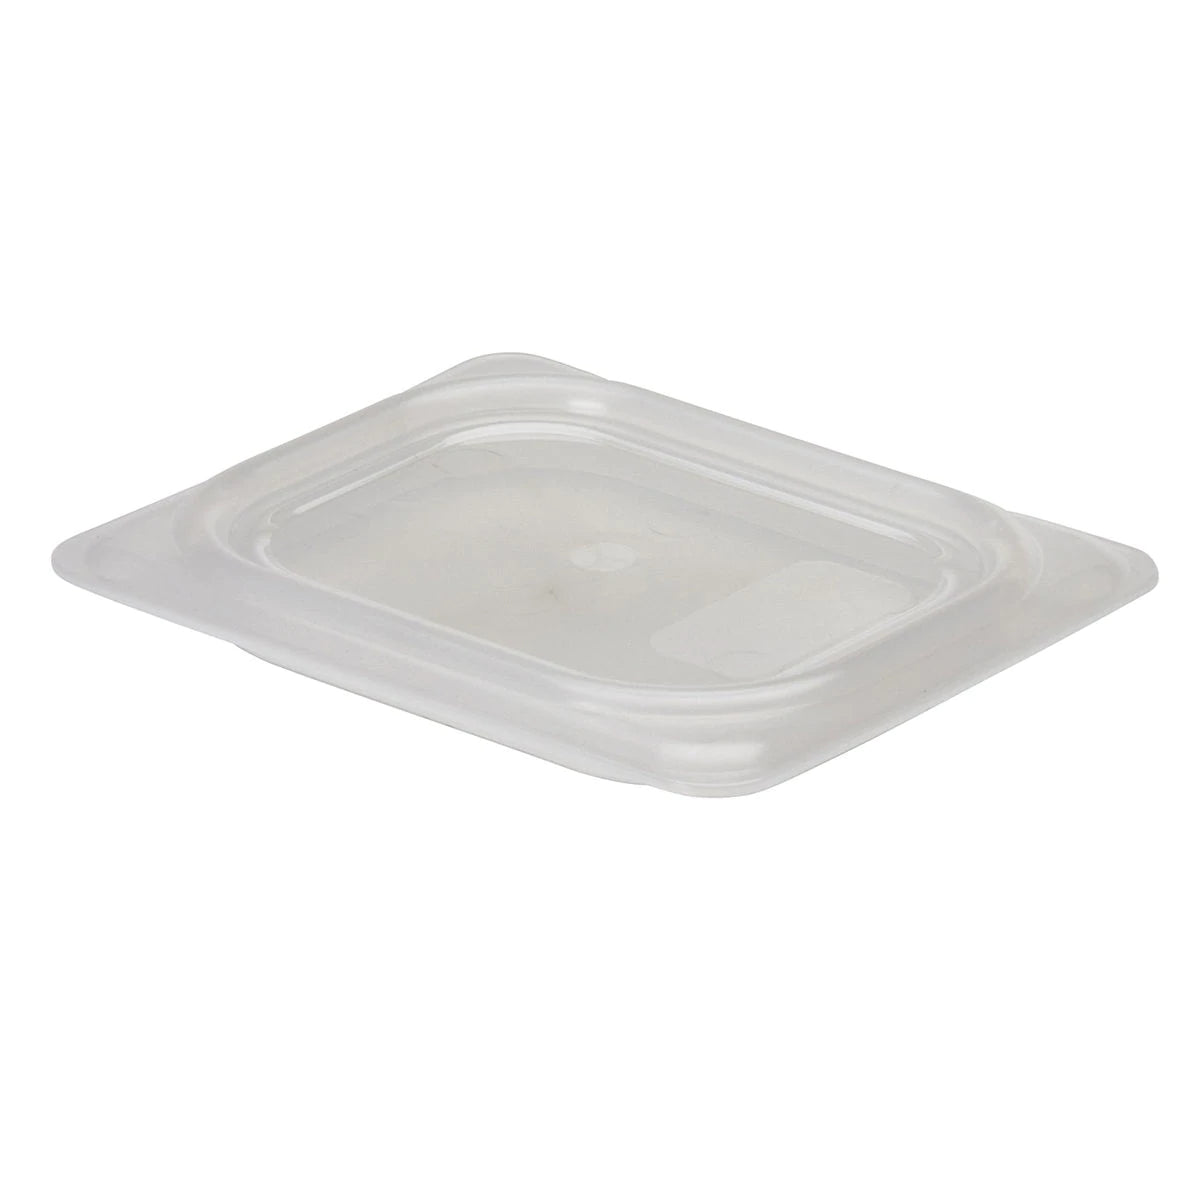 1/1 Full Size Polypropylene Gastronorm lid.Product ref:00388.